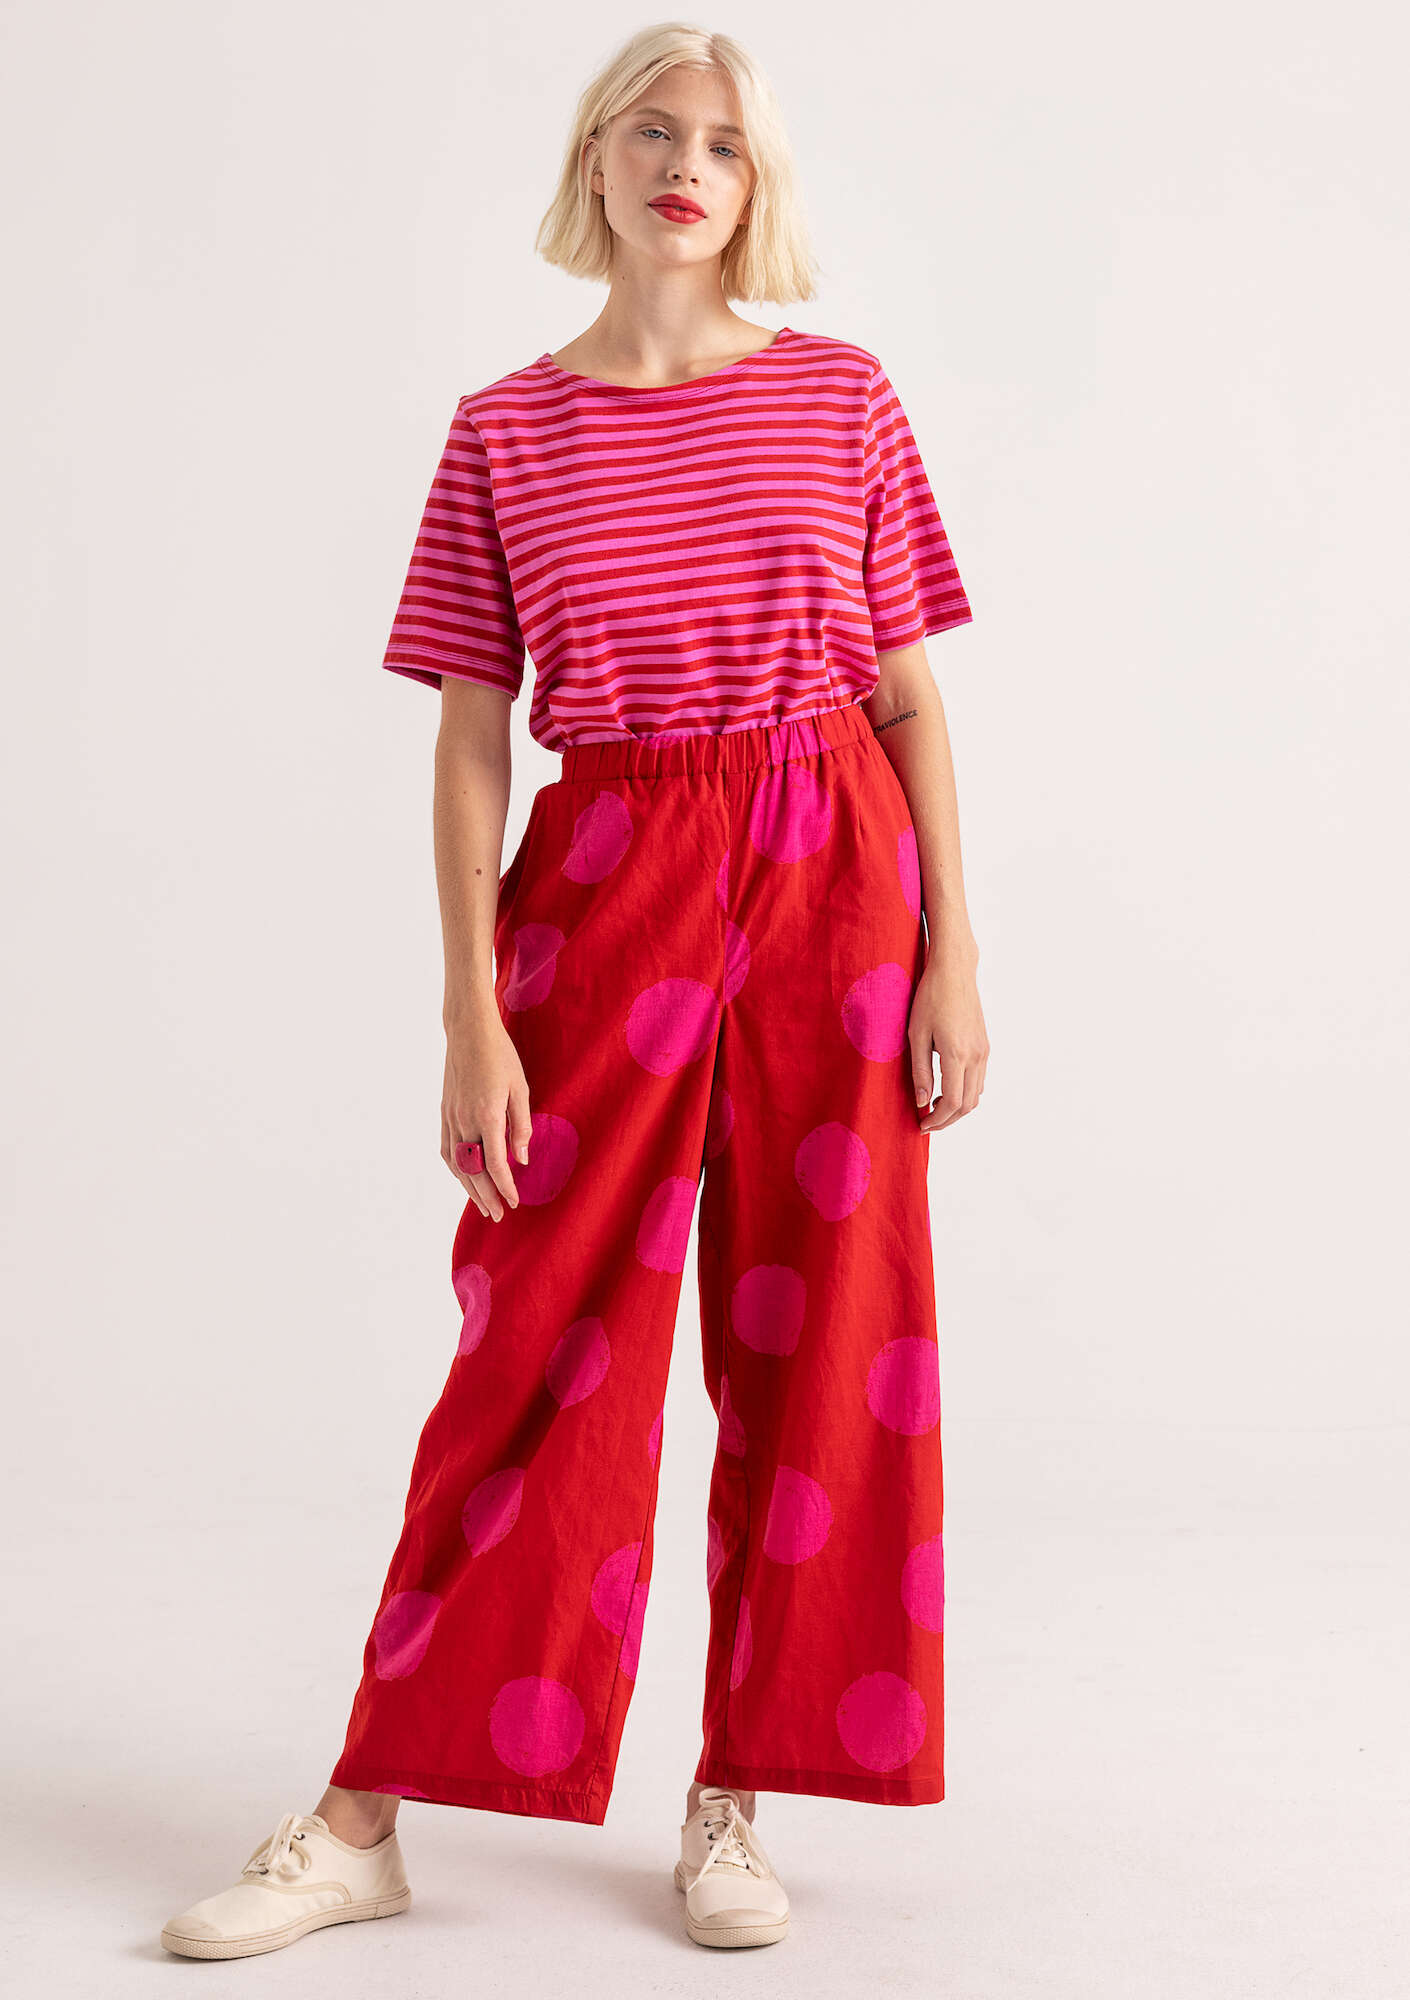  Woven “Palette” pants in organic cotton parrot red/patterned